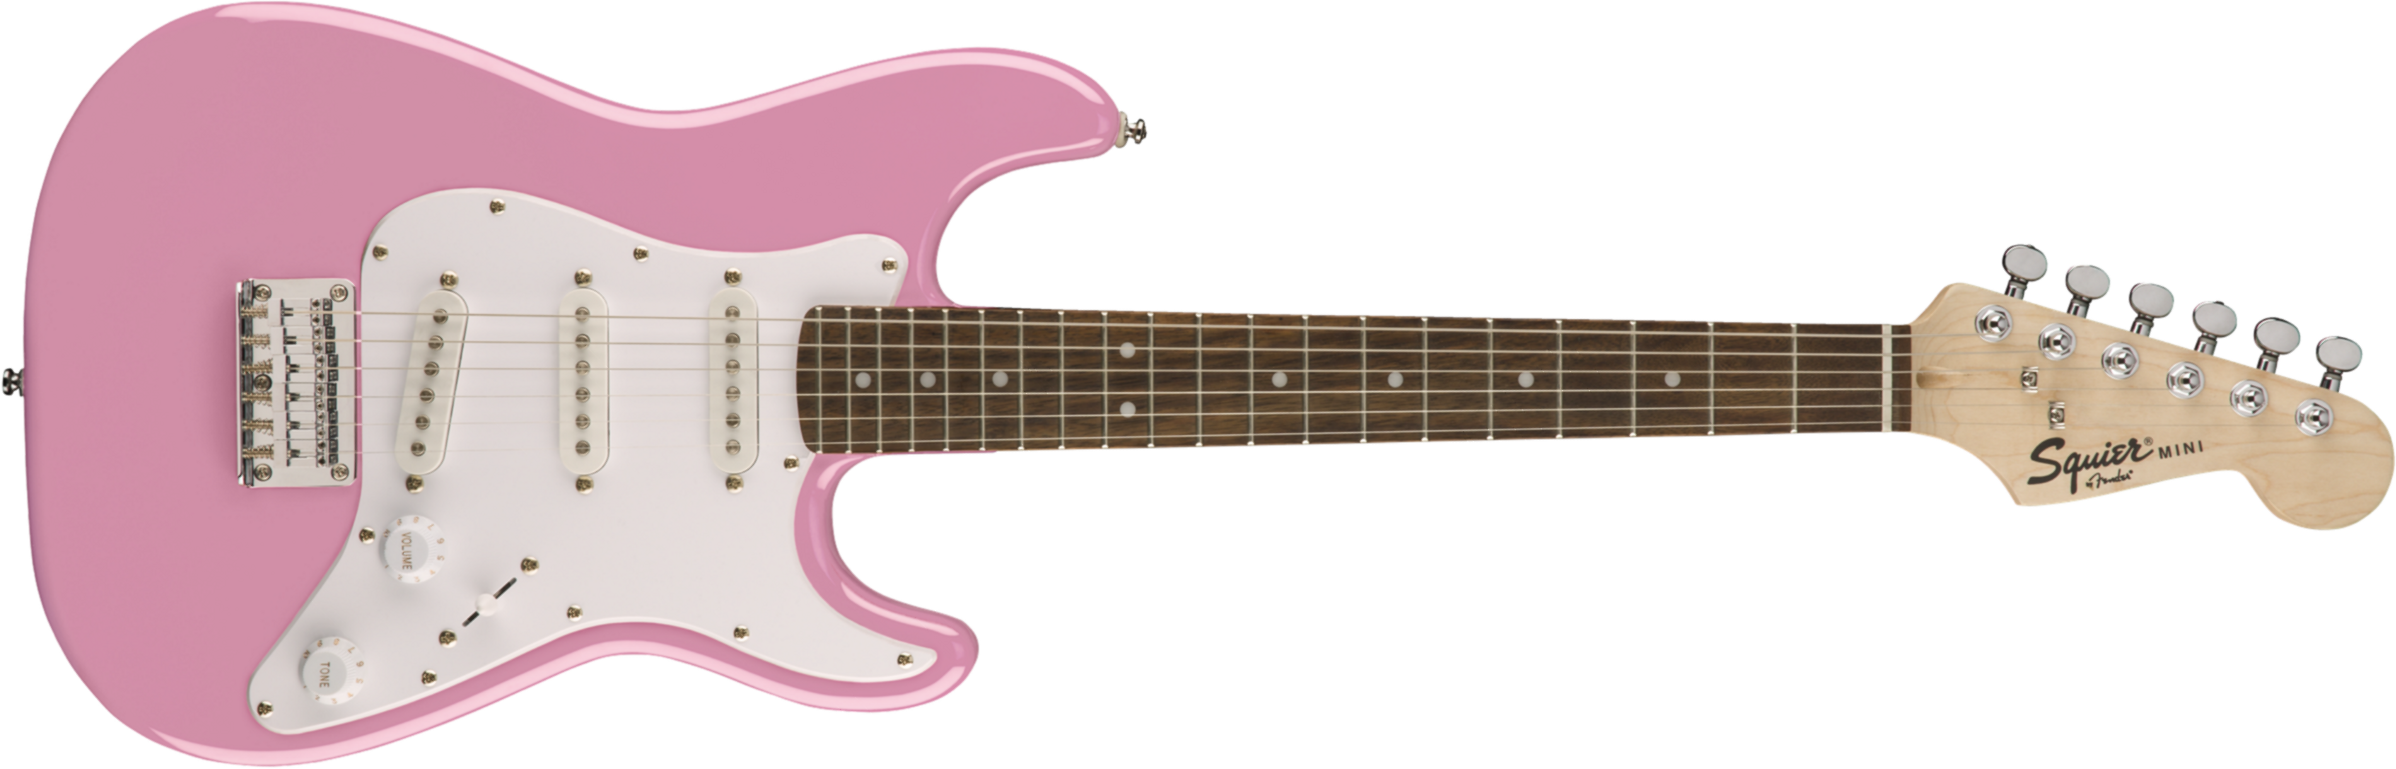 Squier Squier Mini Strat V2 Ht Sss Lau - Pink - Electric guitar for kids - Main picture